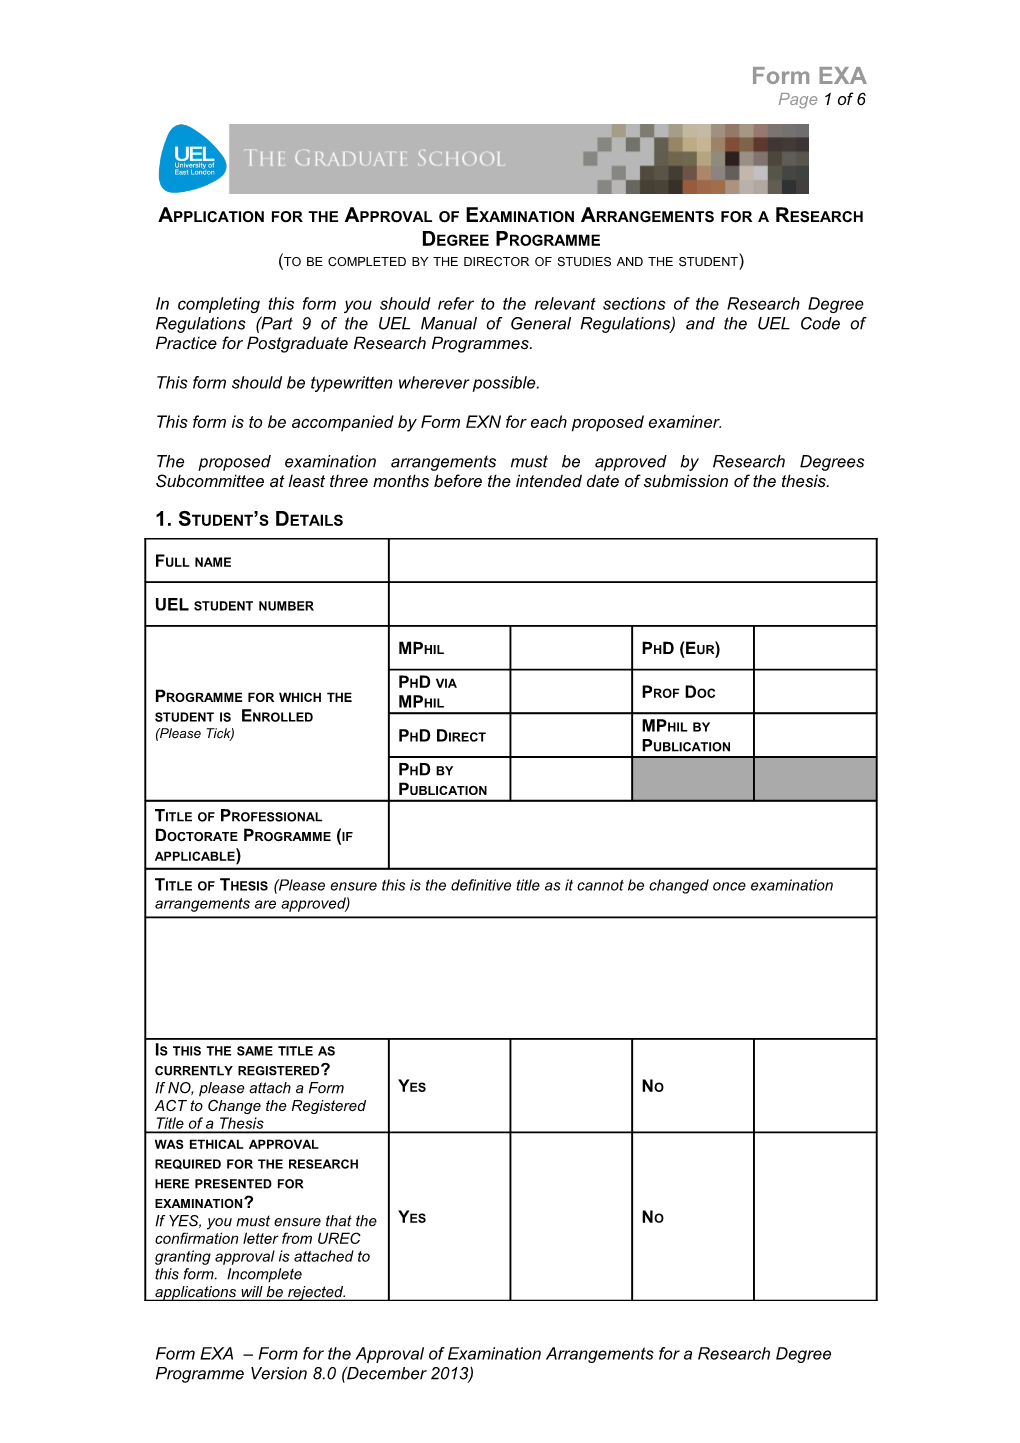 Application for the Approval of Examination Arrangements for a Research Degree Programme